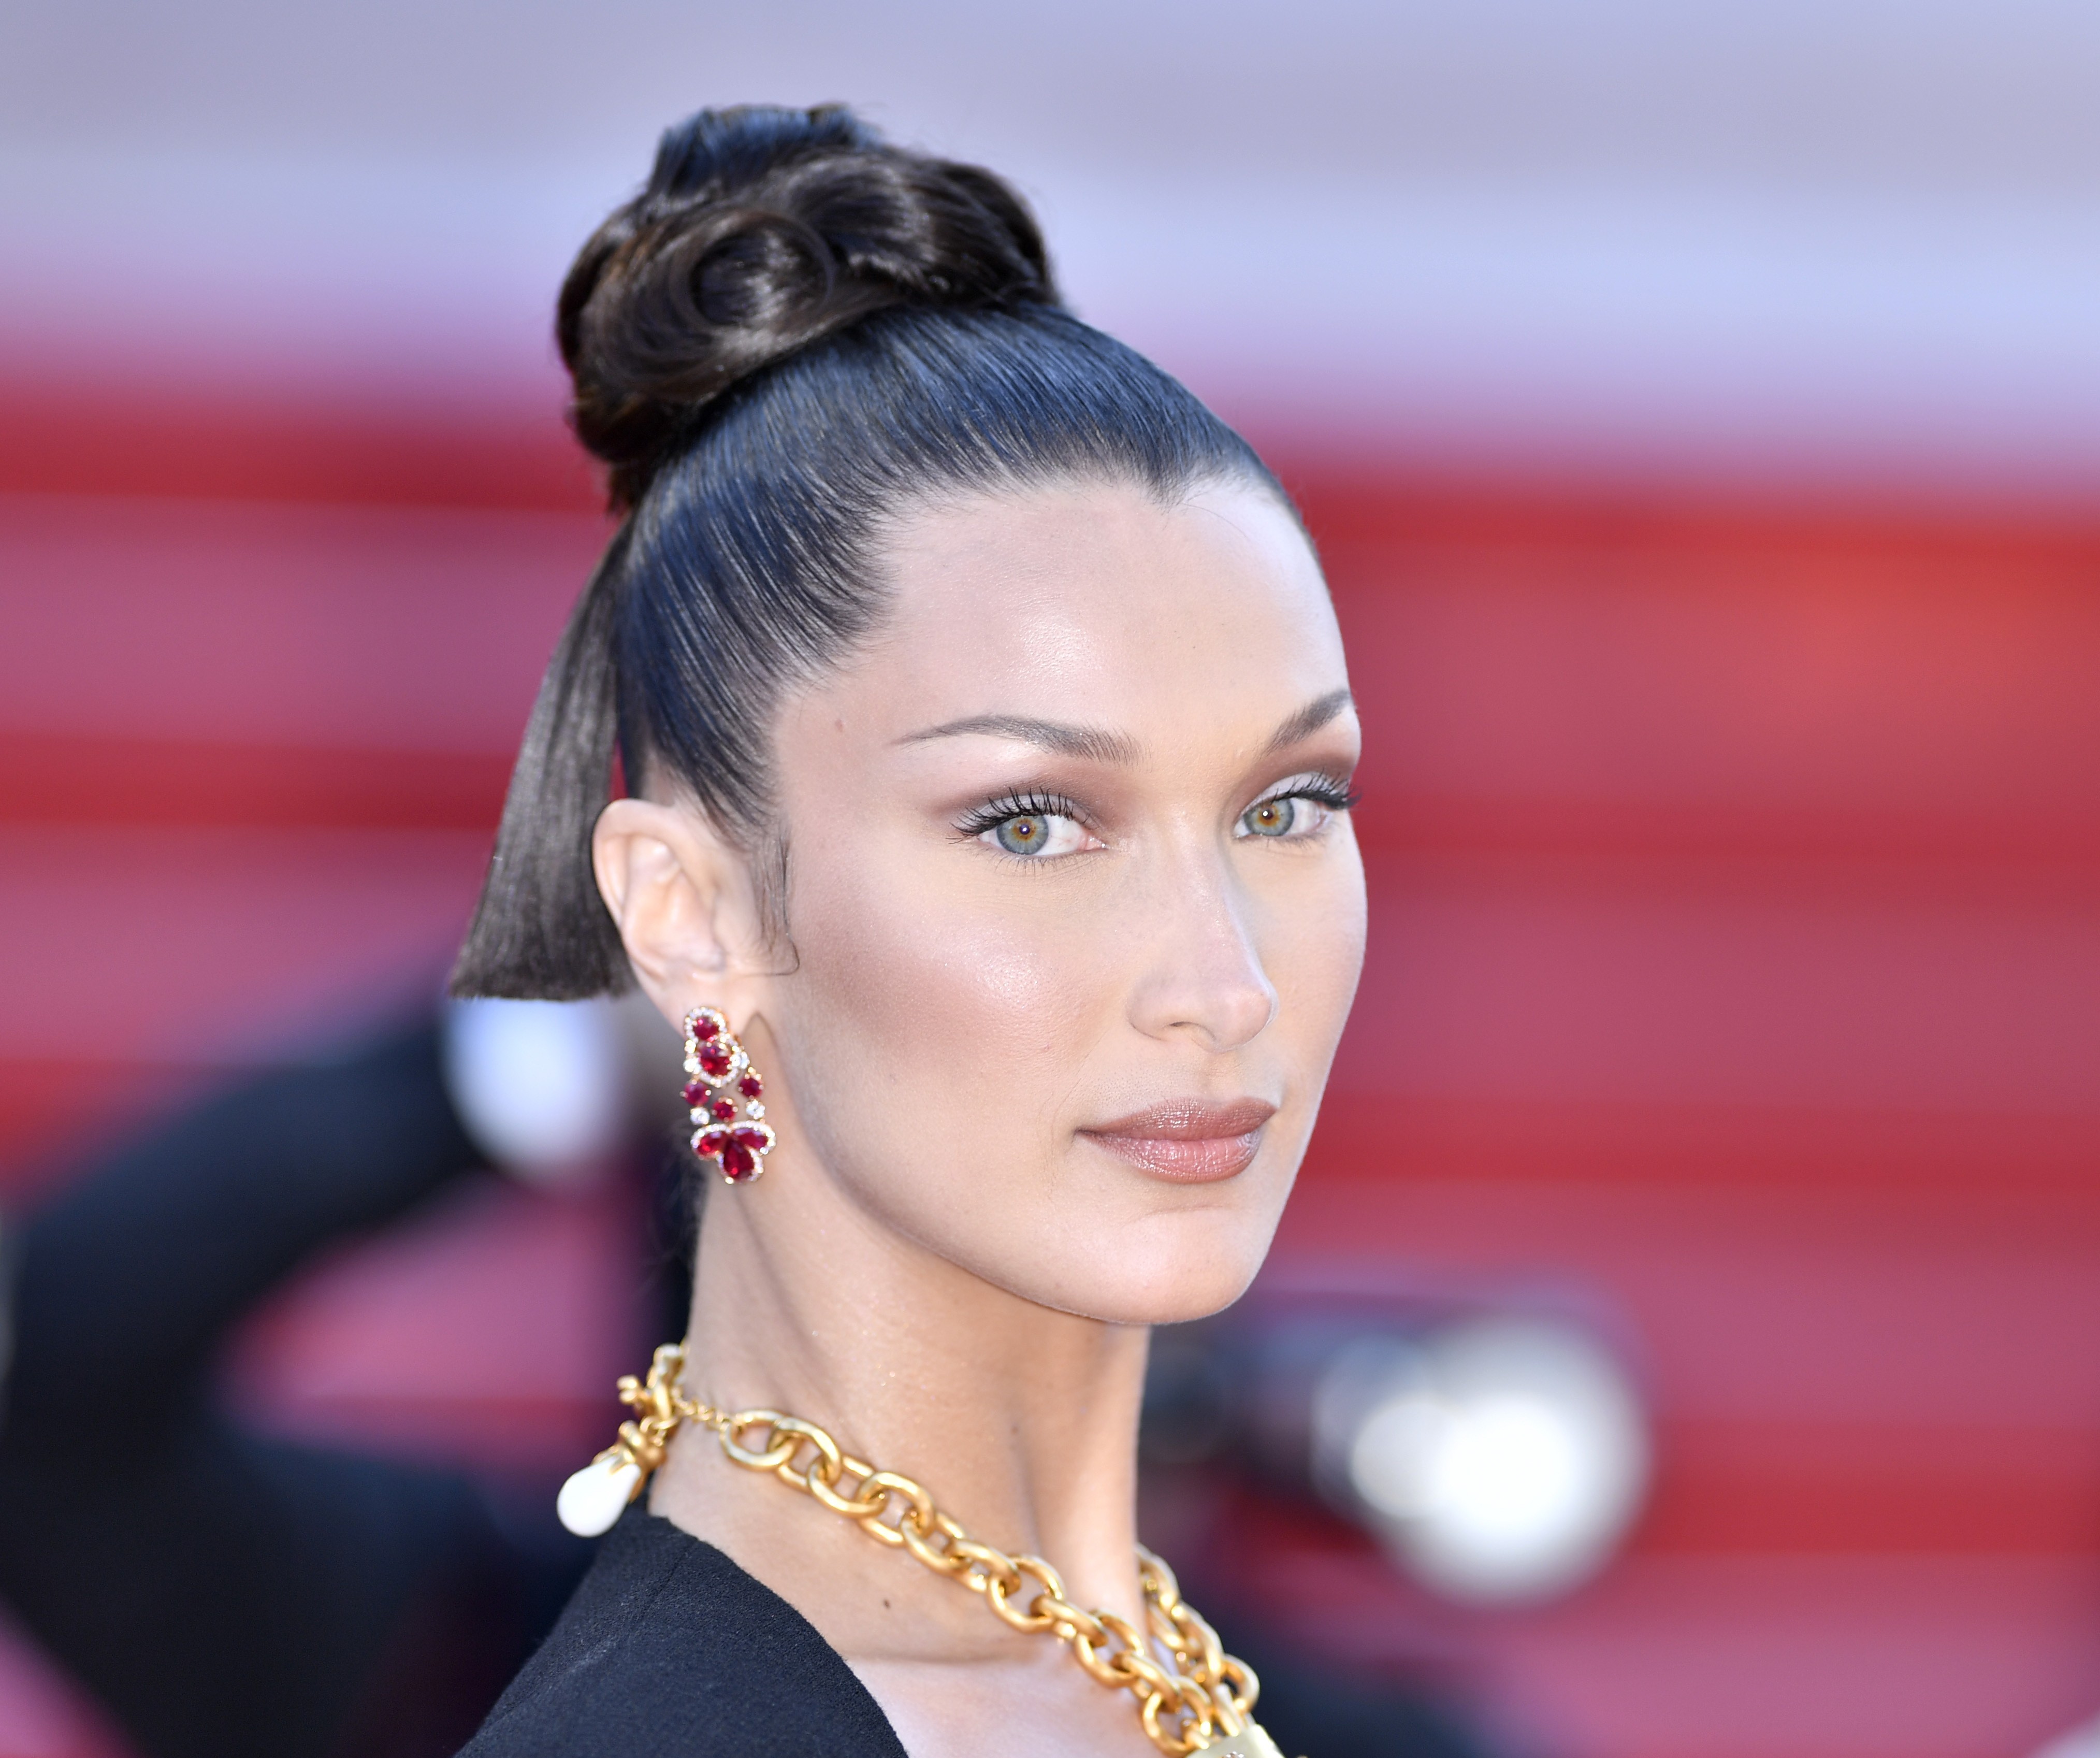 CANNES, FRANCE - JULY 11: US model Bella Hadid arrives for the screening of the film "Tre Piani" (Three Floors) in competition at the 74th Cannes Film Festival in Cannes, France on July 11, 2021 (Photo by Mustafa Yalcin/Anadolu Agency via Getty Images) (Foto: Anadolu Agency via Getty Images)